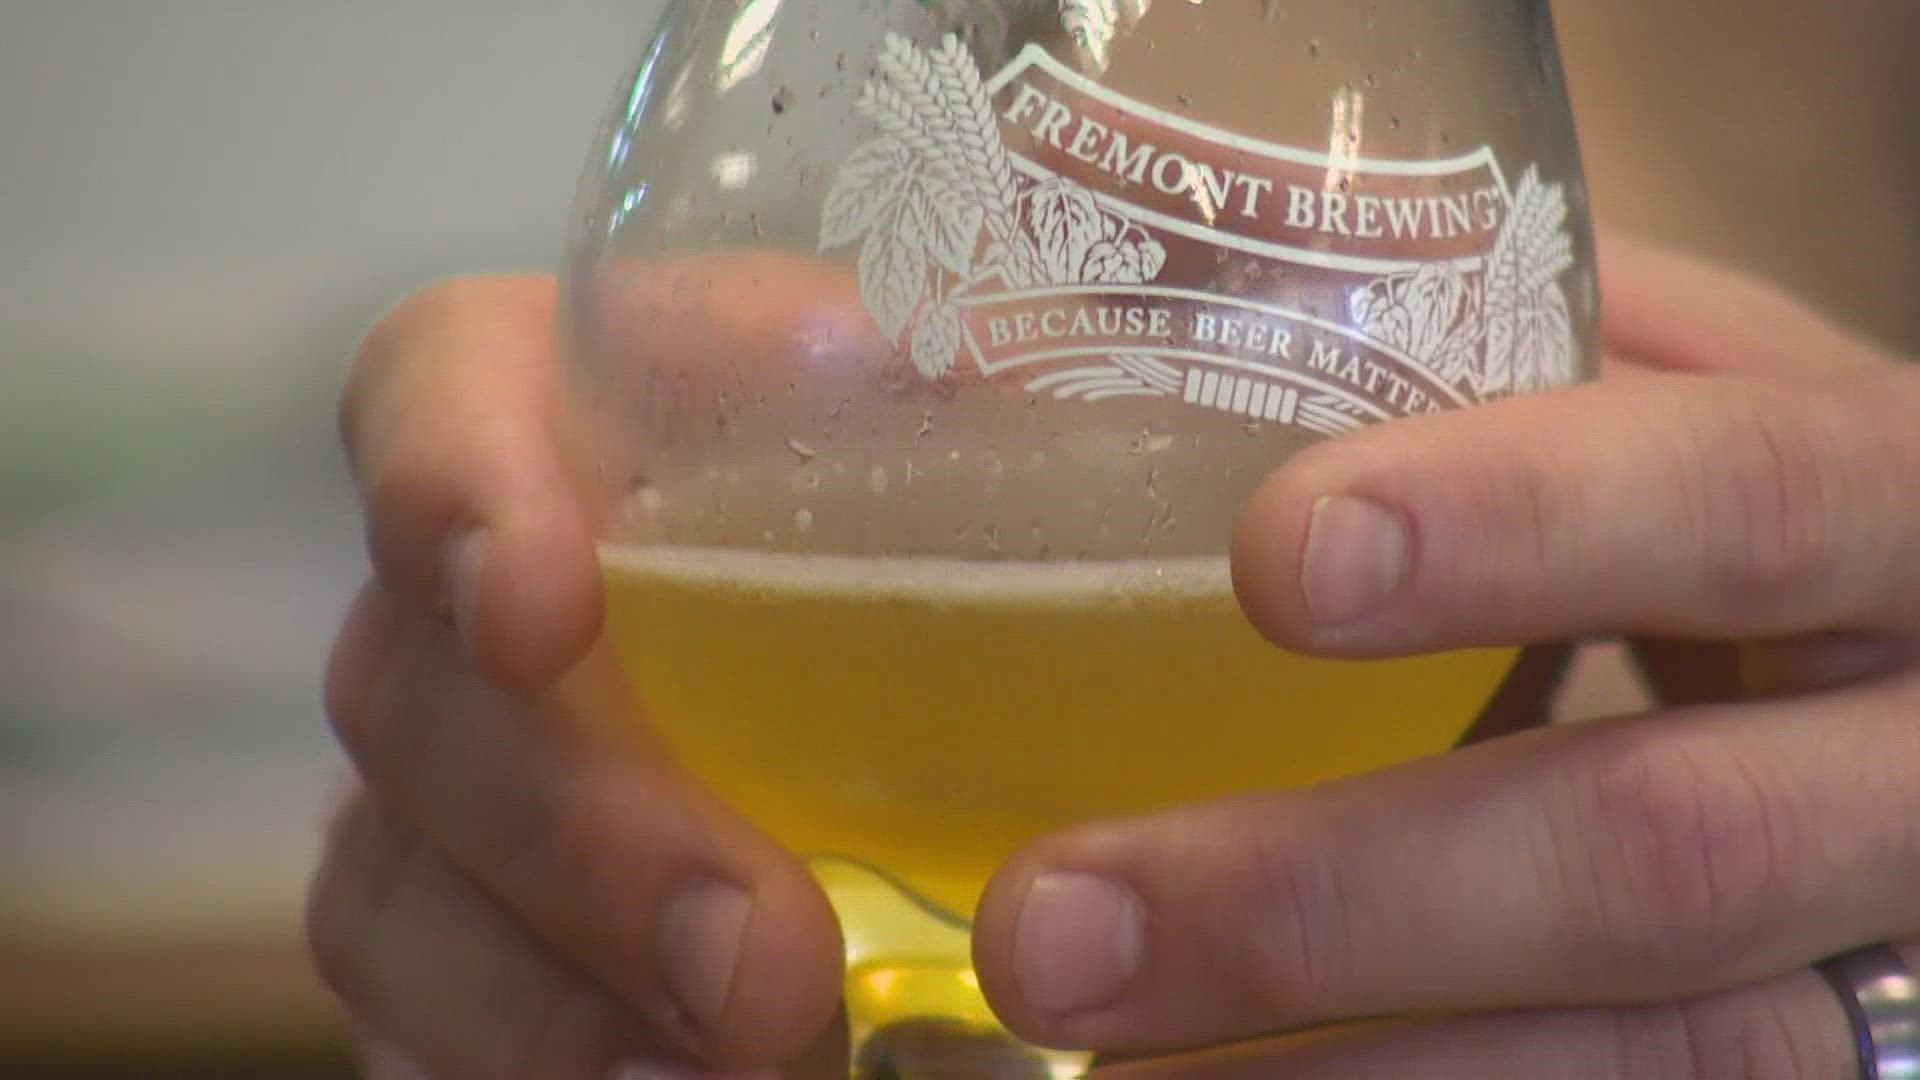 The owner of Freemont Brewing says thousands of pounds of their hop harvest were affected by wildfire smoke.